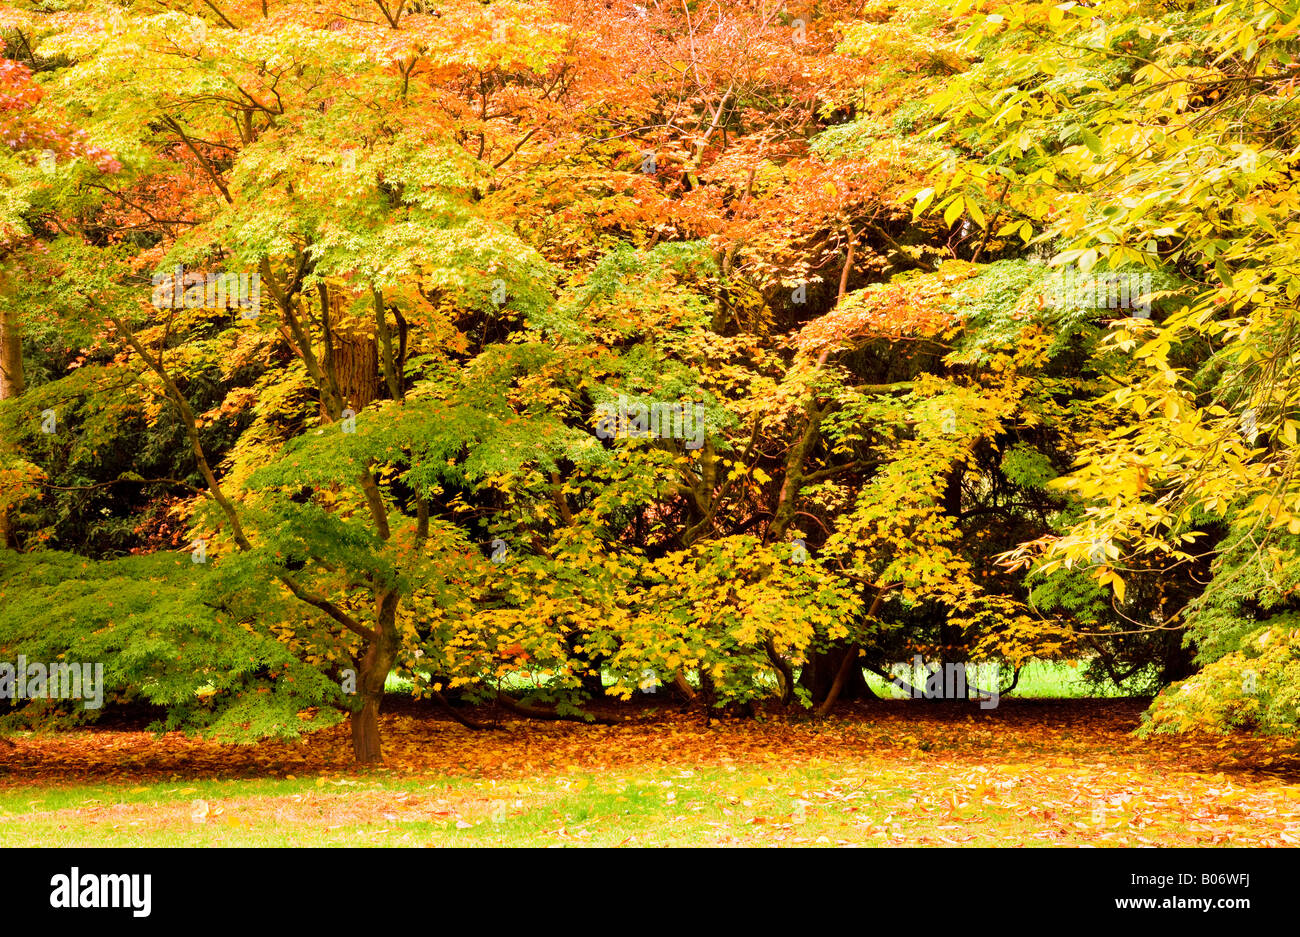 Autumn trees with gold and yellow foliage Stock Photo